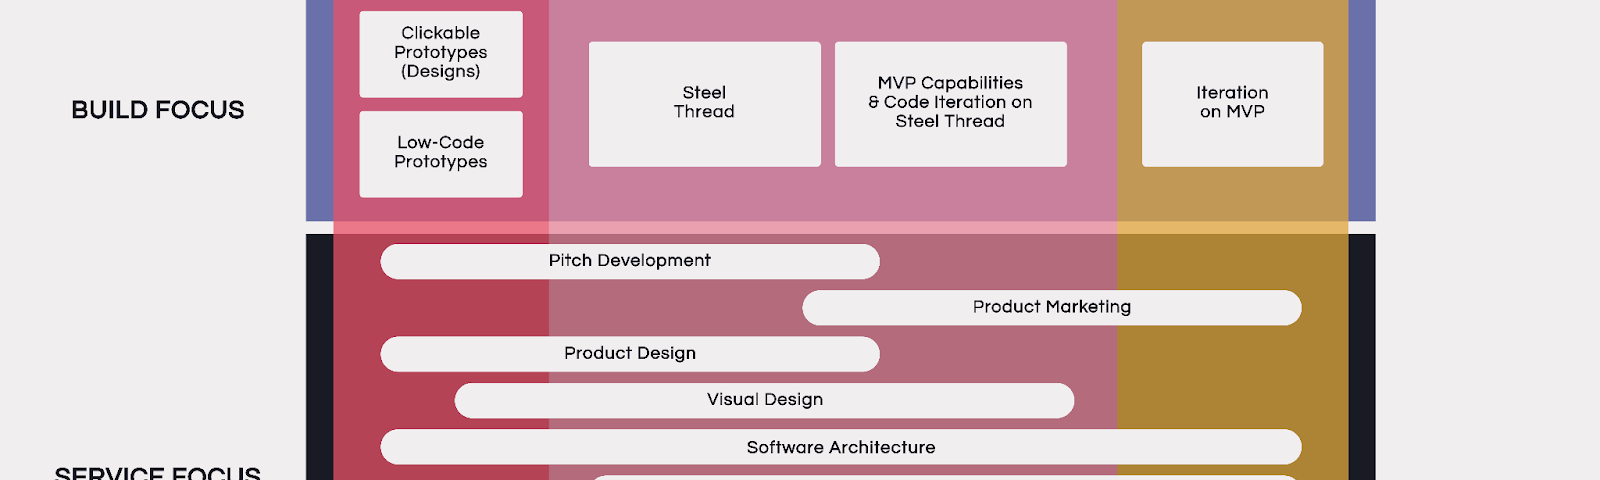 processes related to each step in the product development life cycle